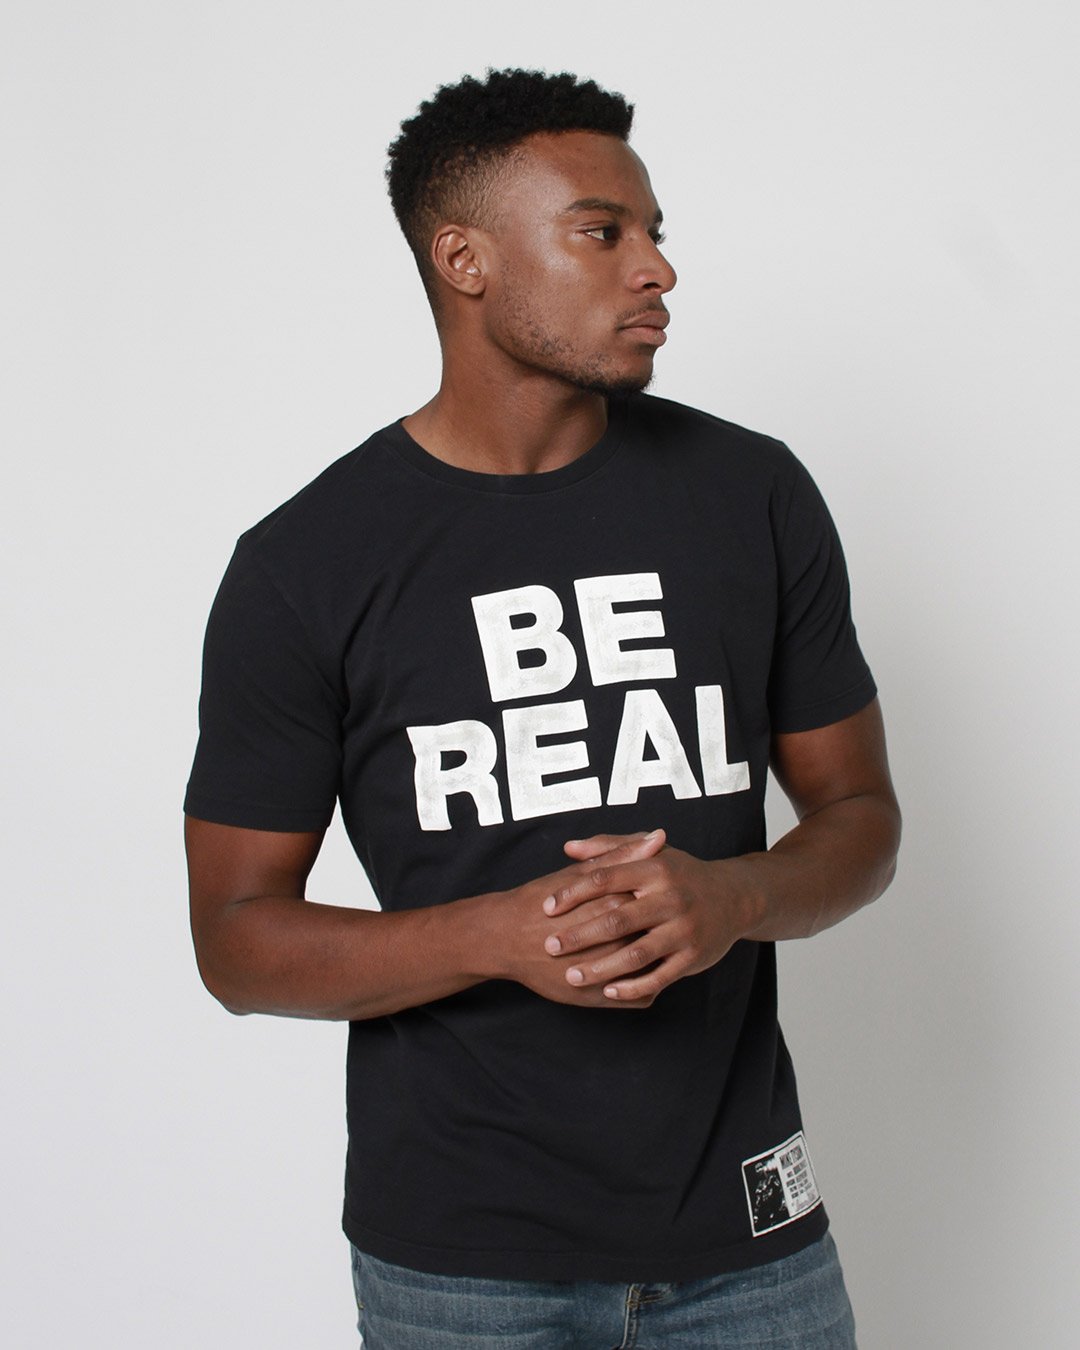 Tyson 'Be Real' Tee - Roots of, Inc 